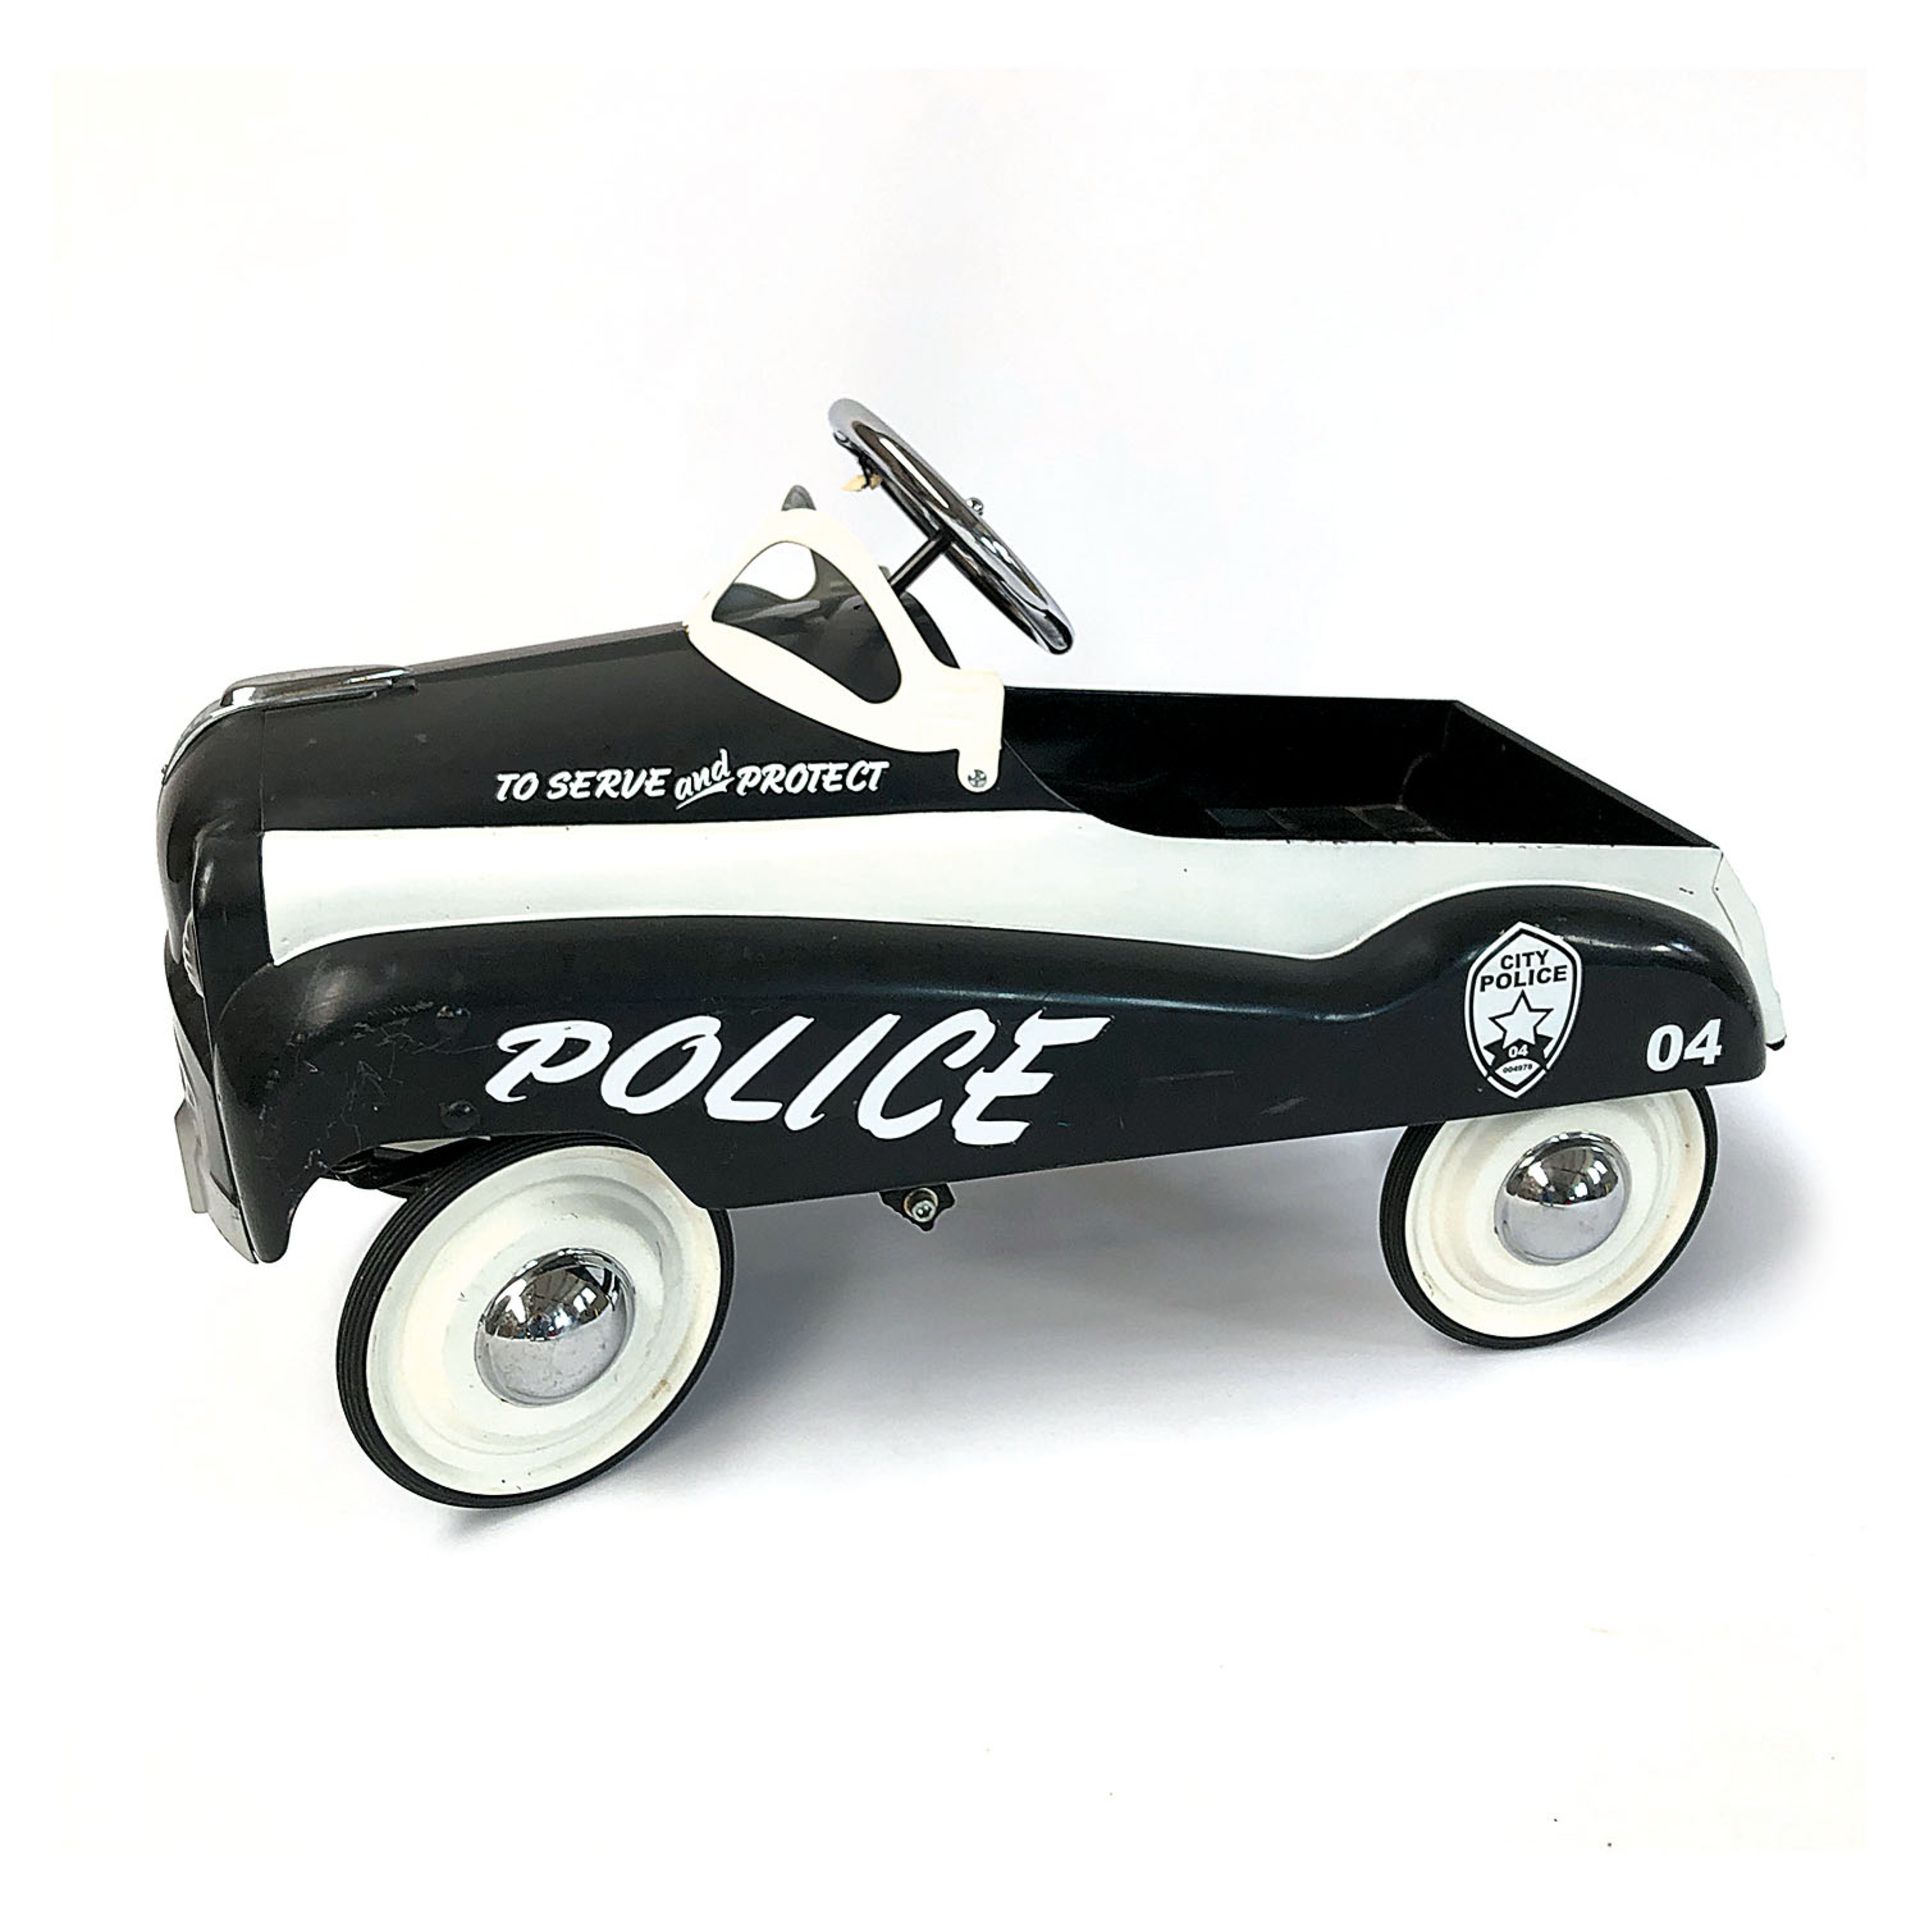 Reproduction Children's Metal Police Pedal Car - Image 2 of 4